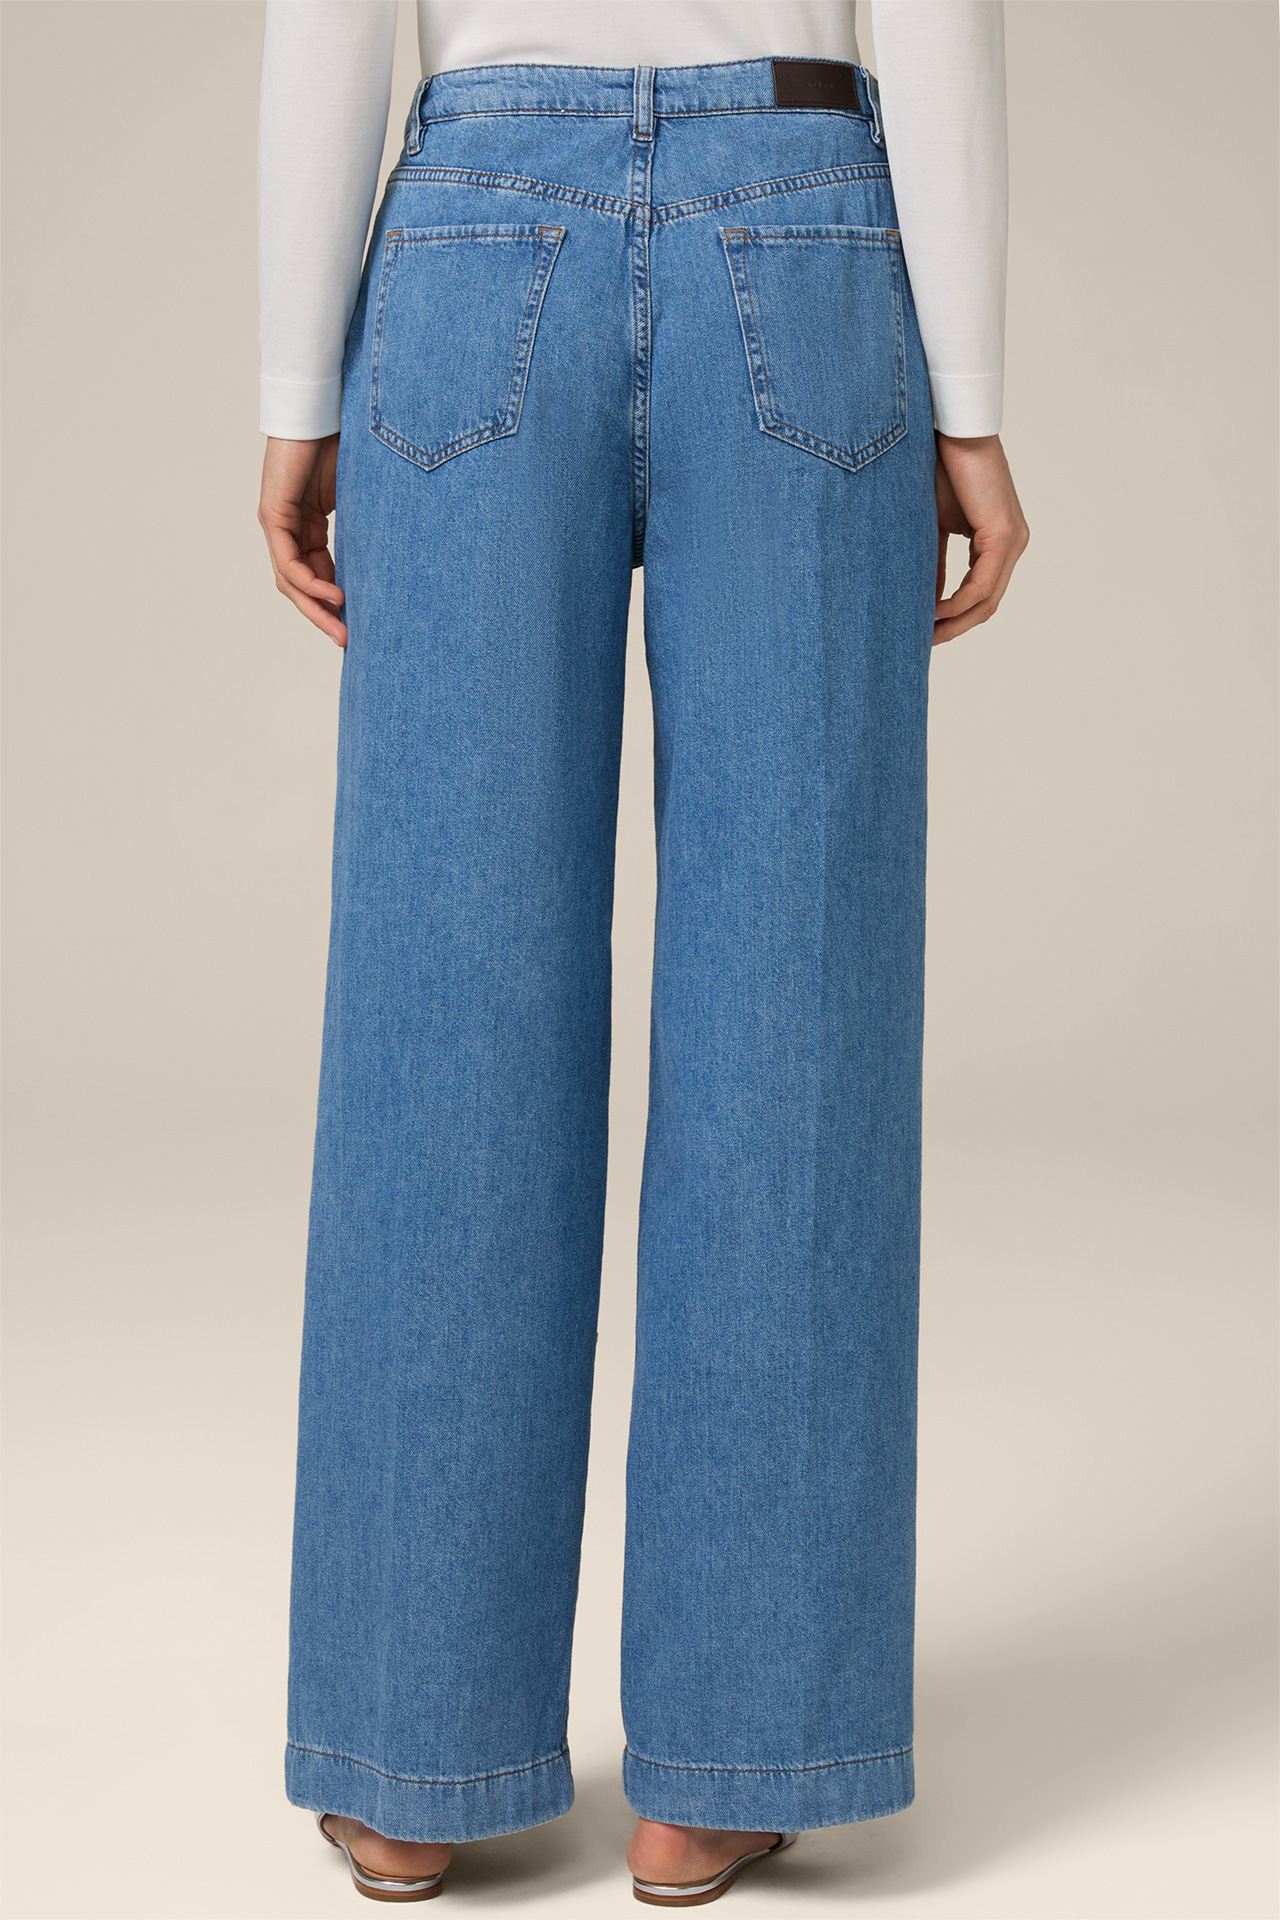 Jeans-Palazzo-Hose in Light Blue Washed